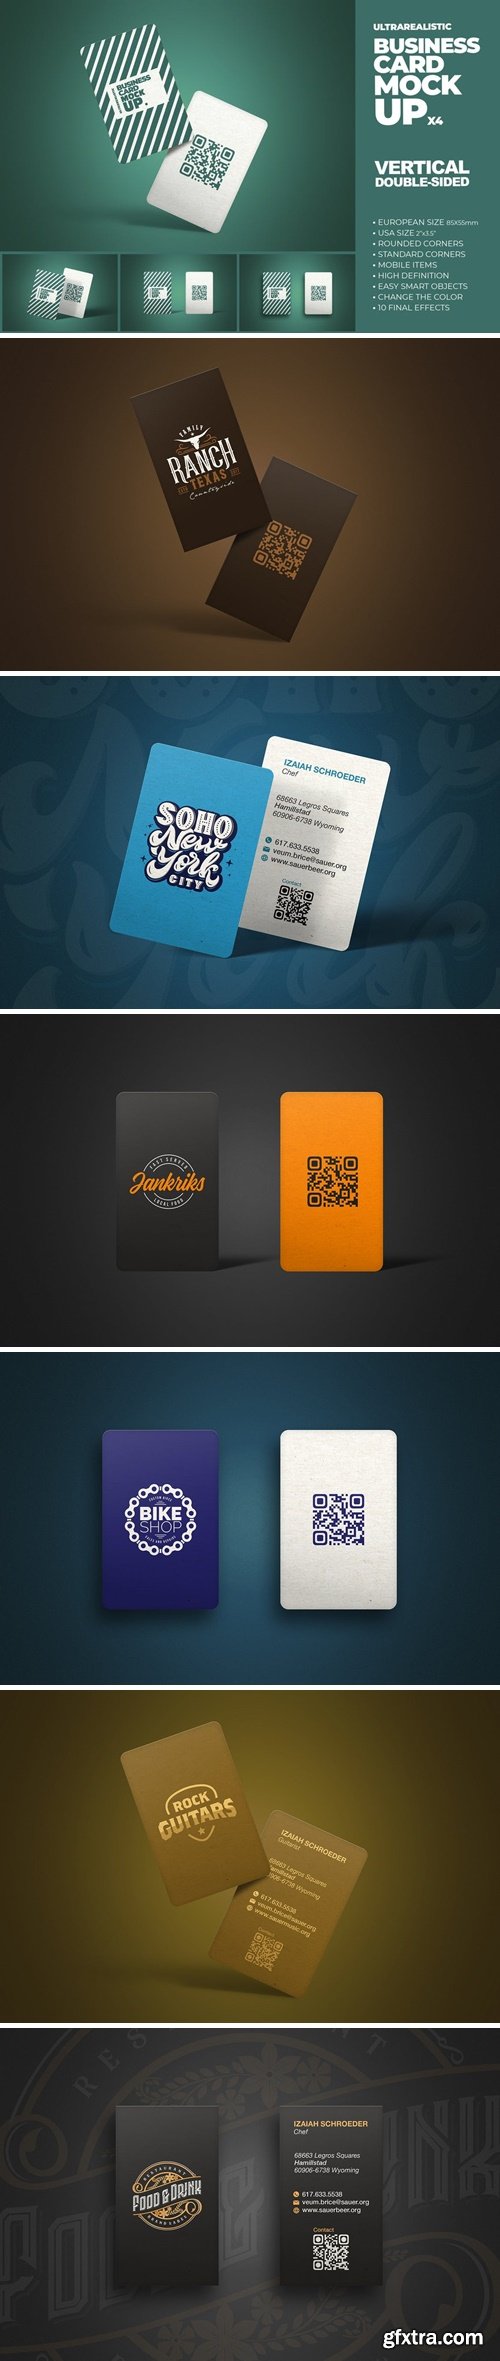 Vertical Double Sided Card Mockup x4 6WUYZJ8